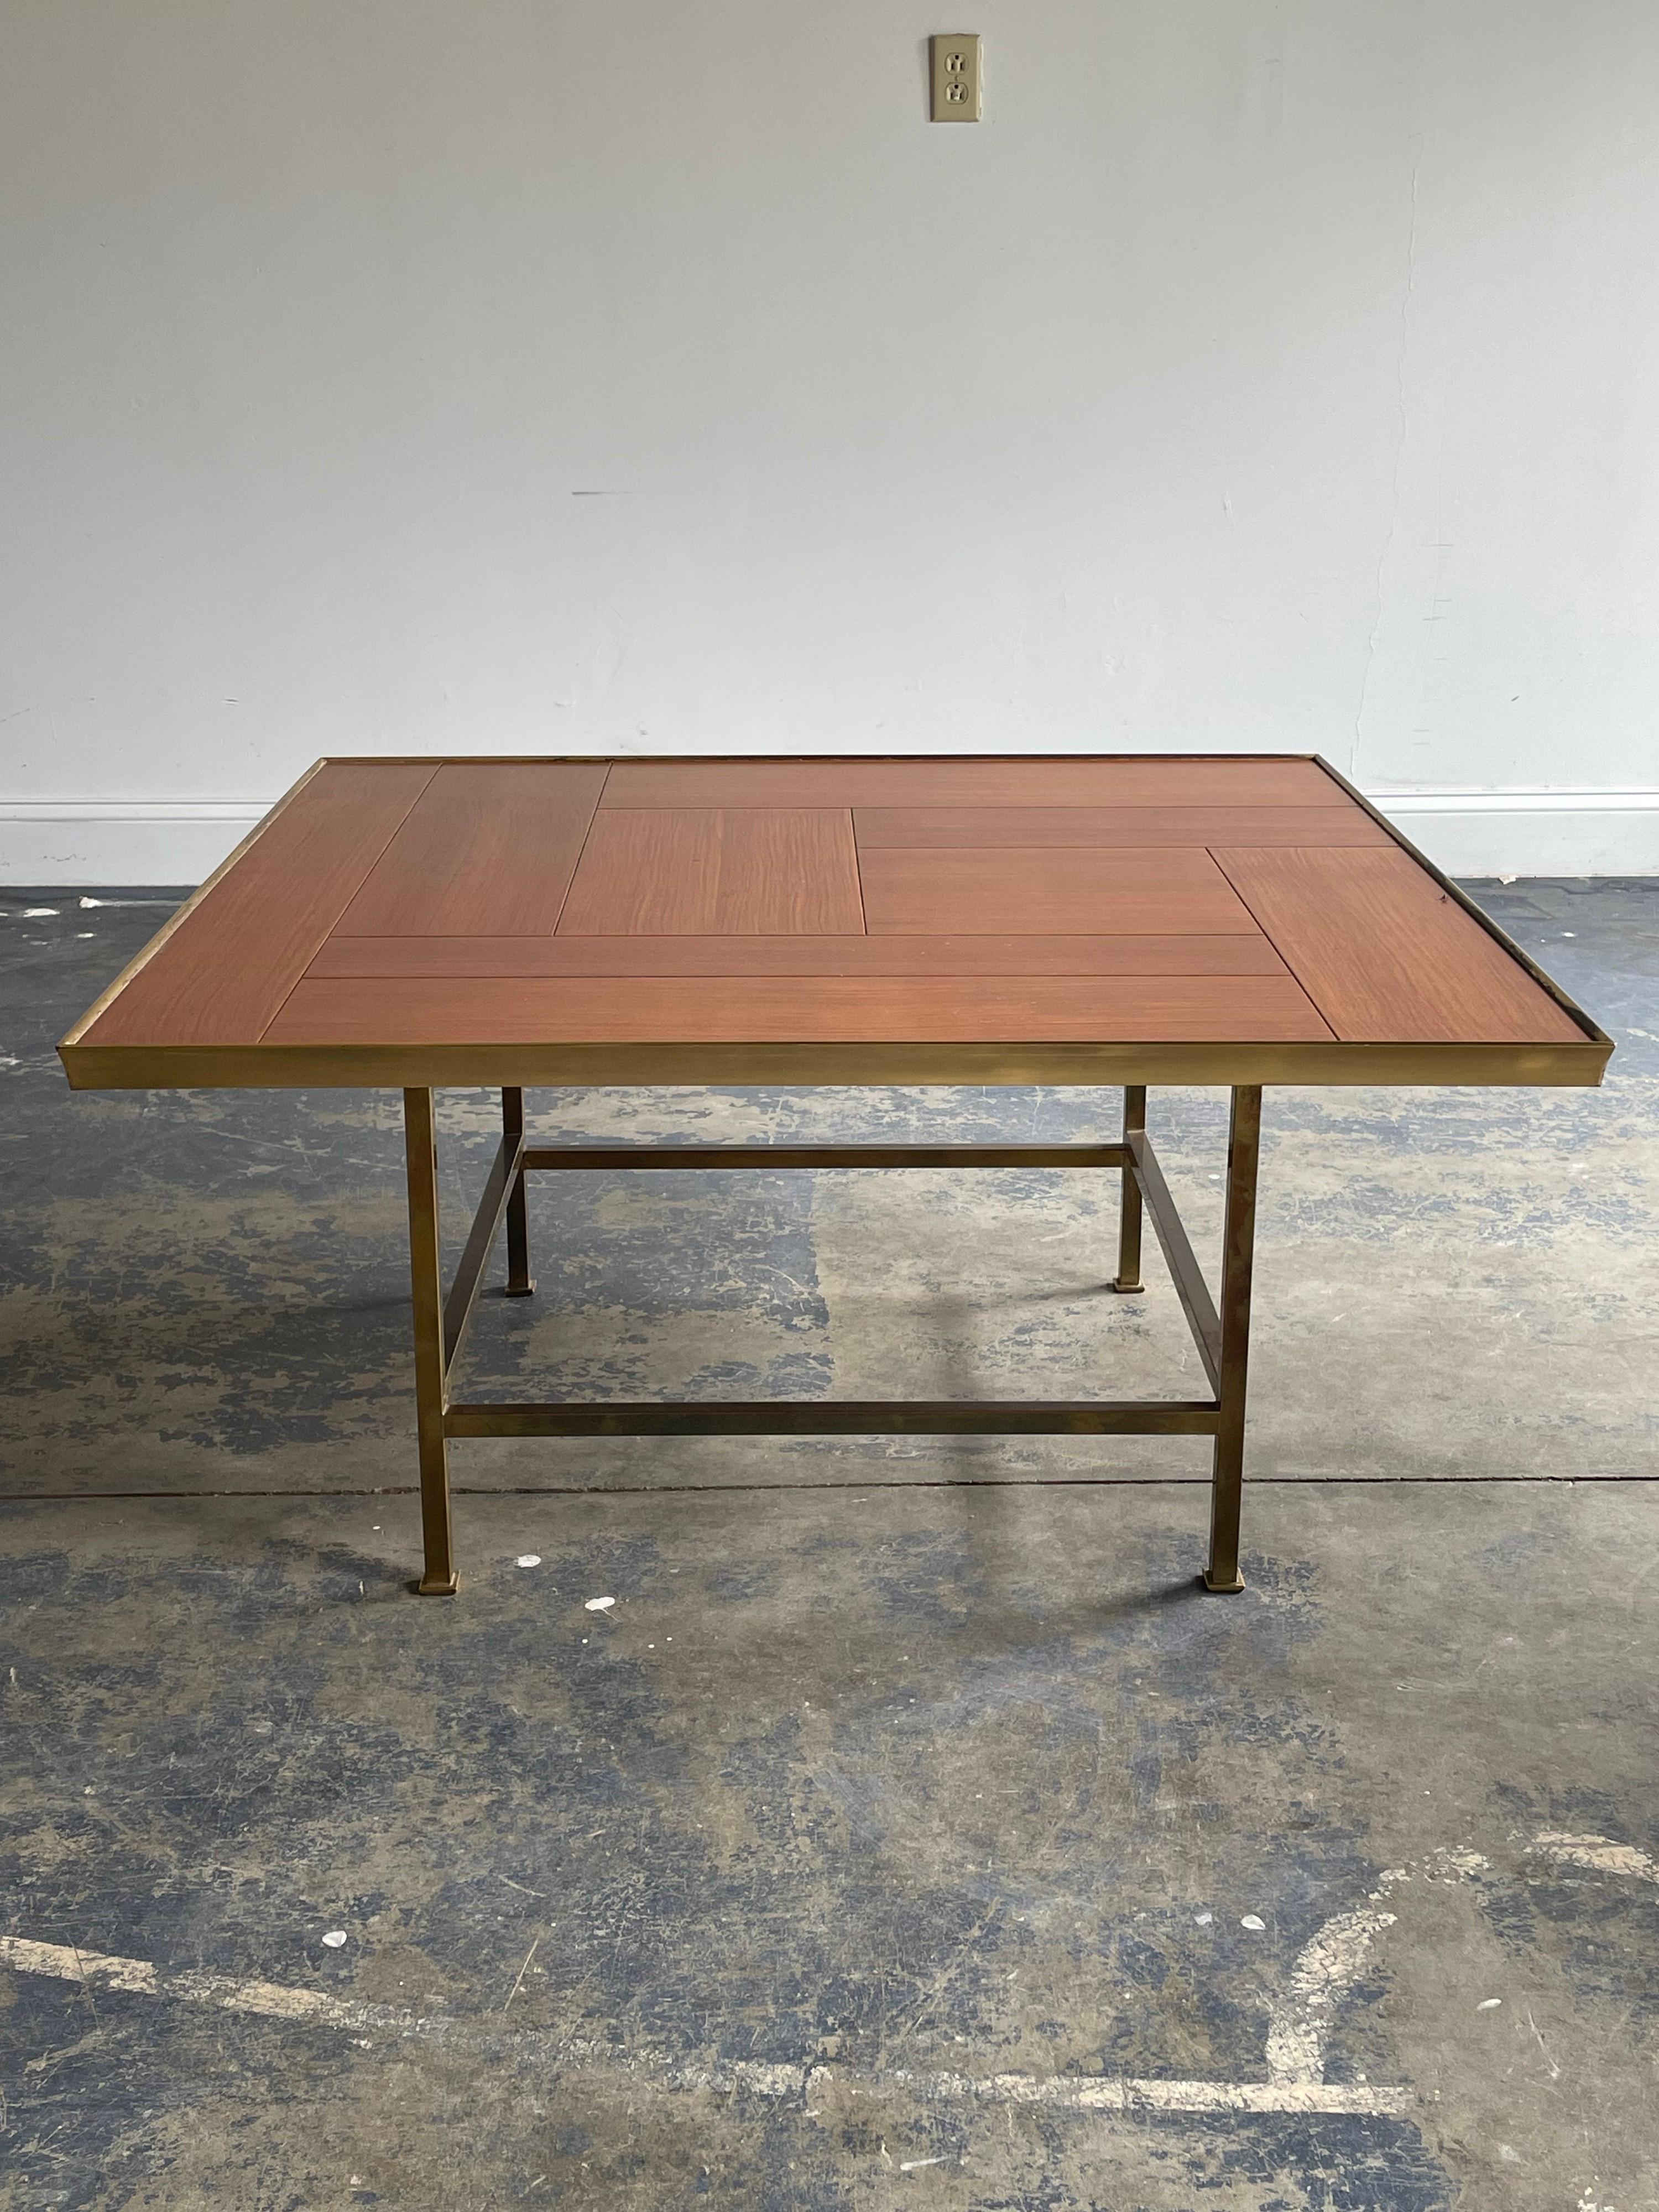 A stunning and scarce coffee table designed by Edward Wormley for Dunbar. Features a geometric wood top with brass frame and brass base.

Would work well in a variety of interiors such as modern, mid century modern, contemporary, etc. Piece blends